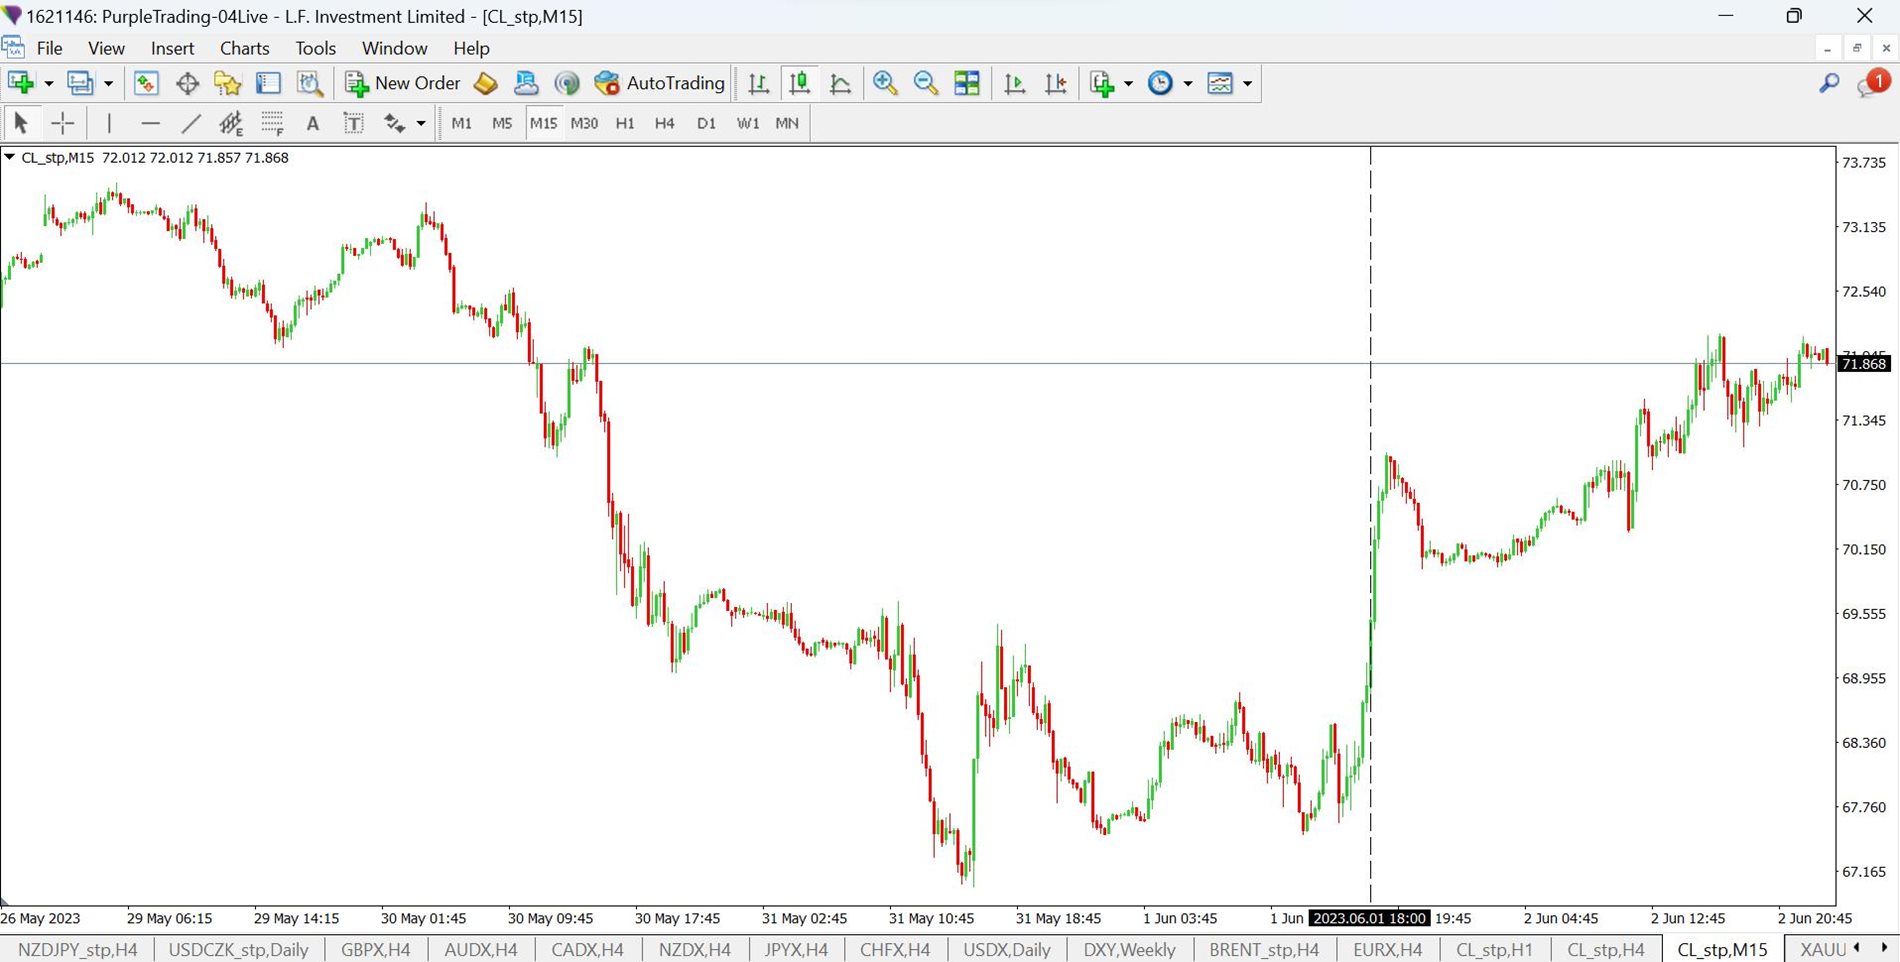 WTI crude oil on the 15-minute time frame